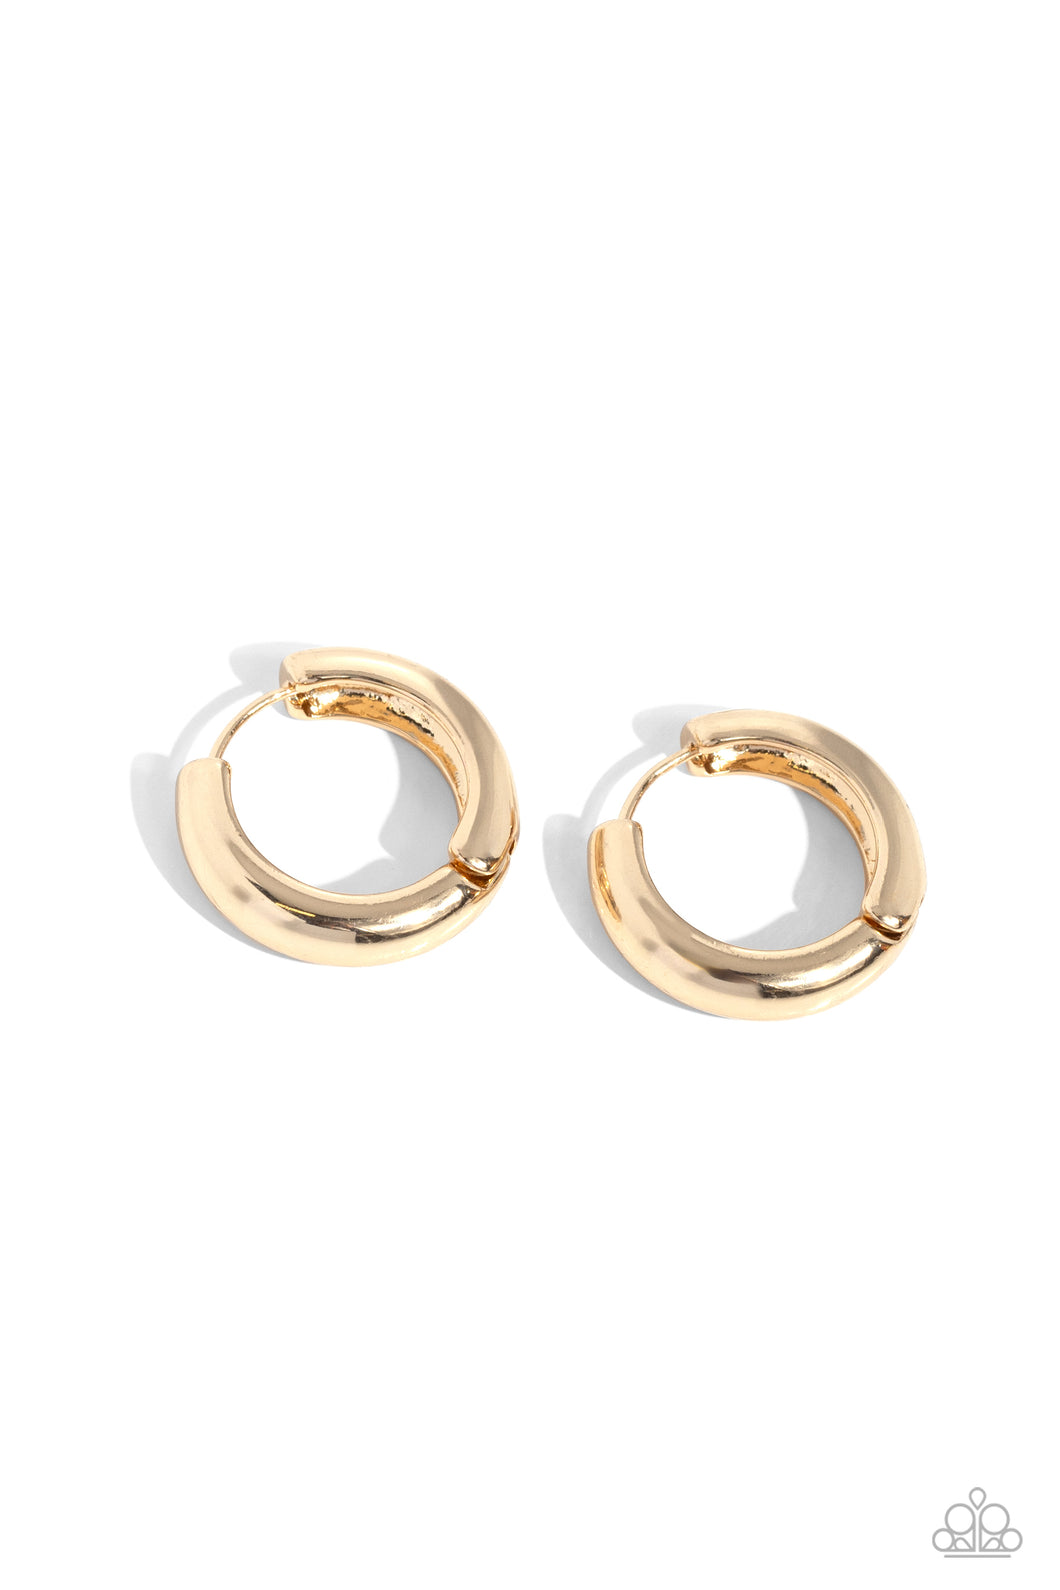 Simply Sinuous - Gold Earring